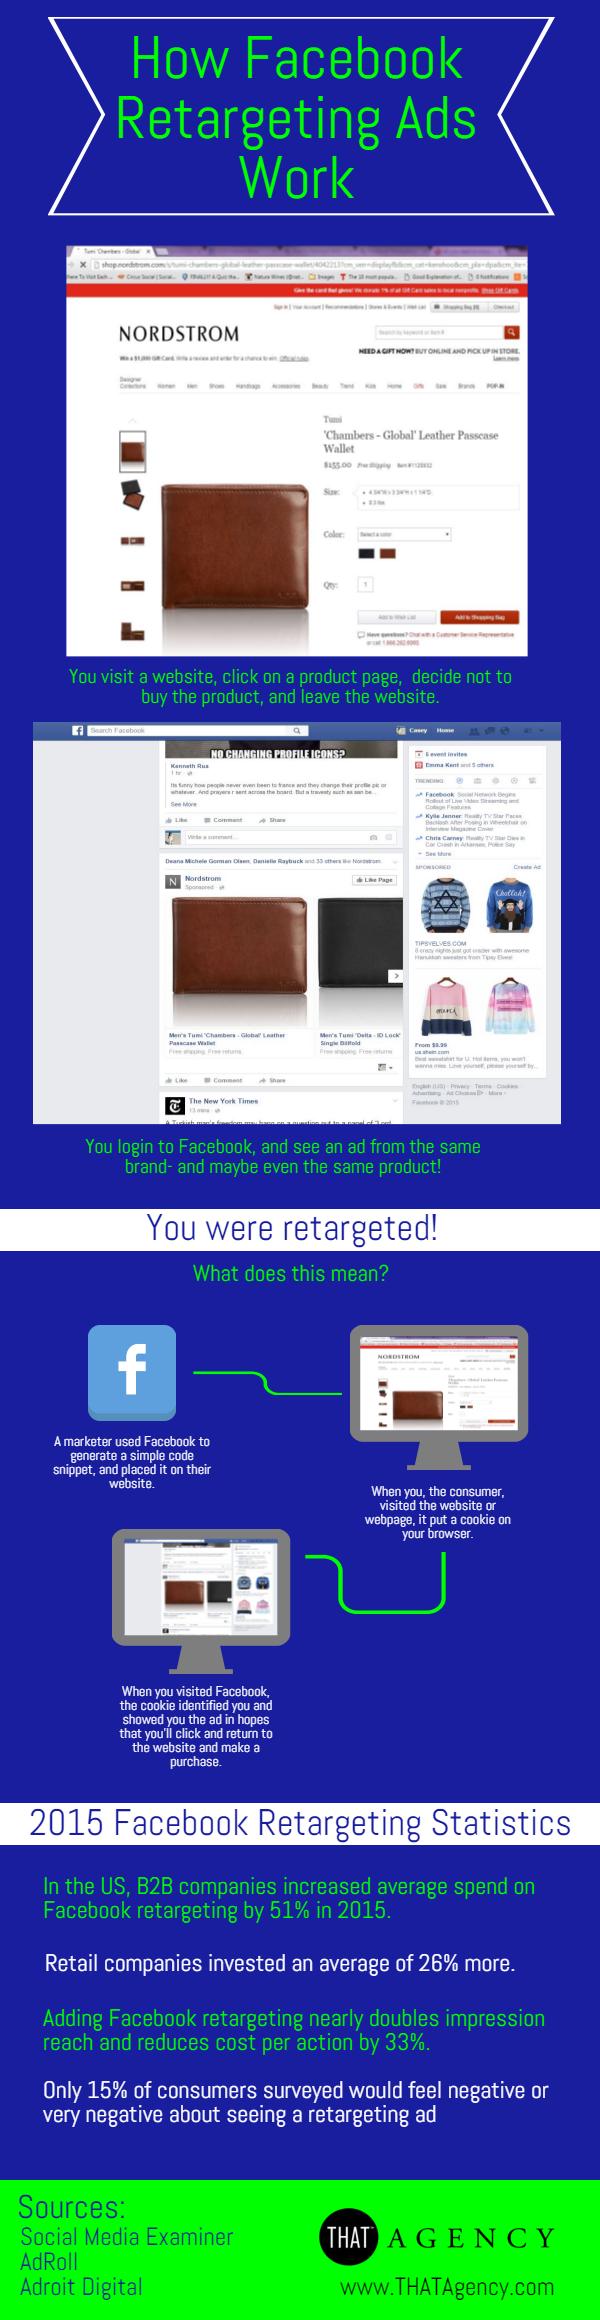 If you’re looking to see a higher ROI from Facebook, we recommend considering Facebook retargeting ads as part of your marketing strategy.